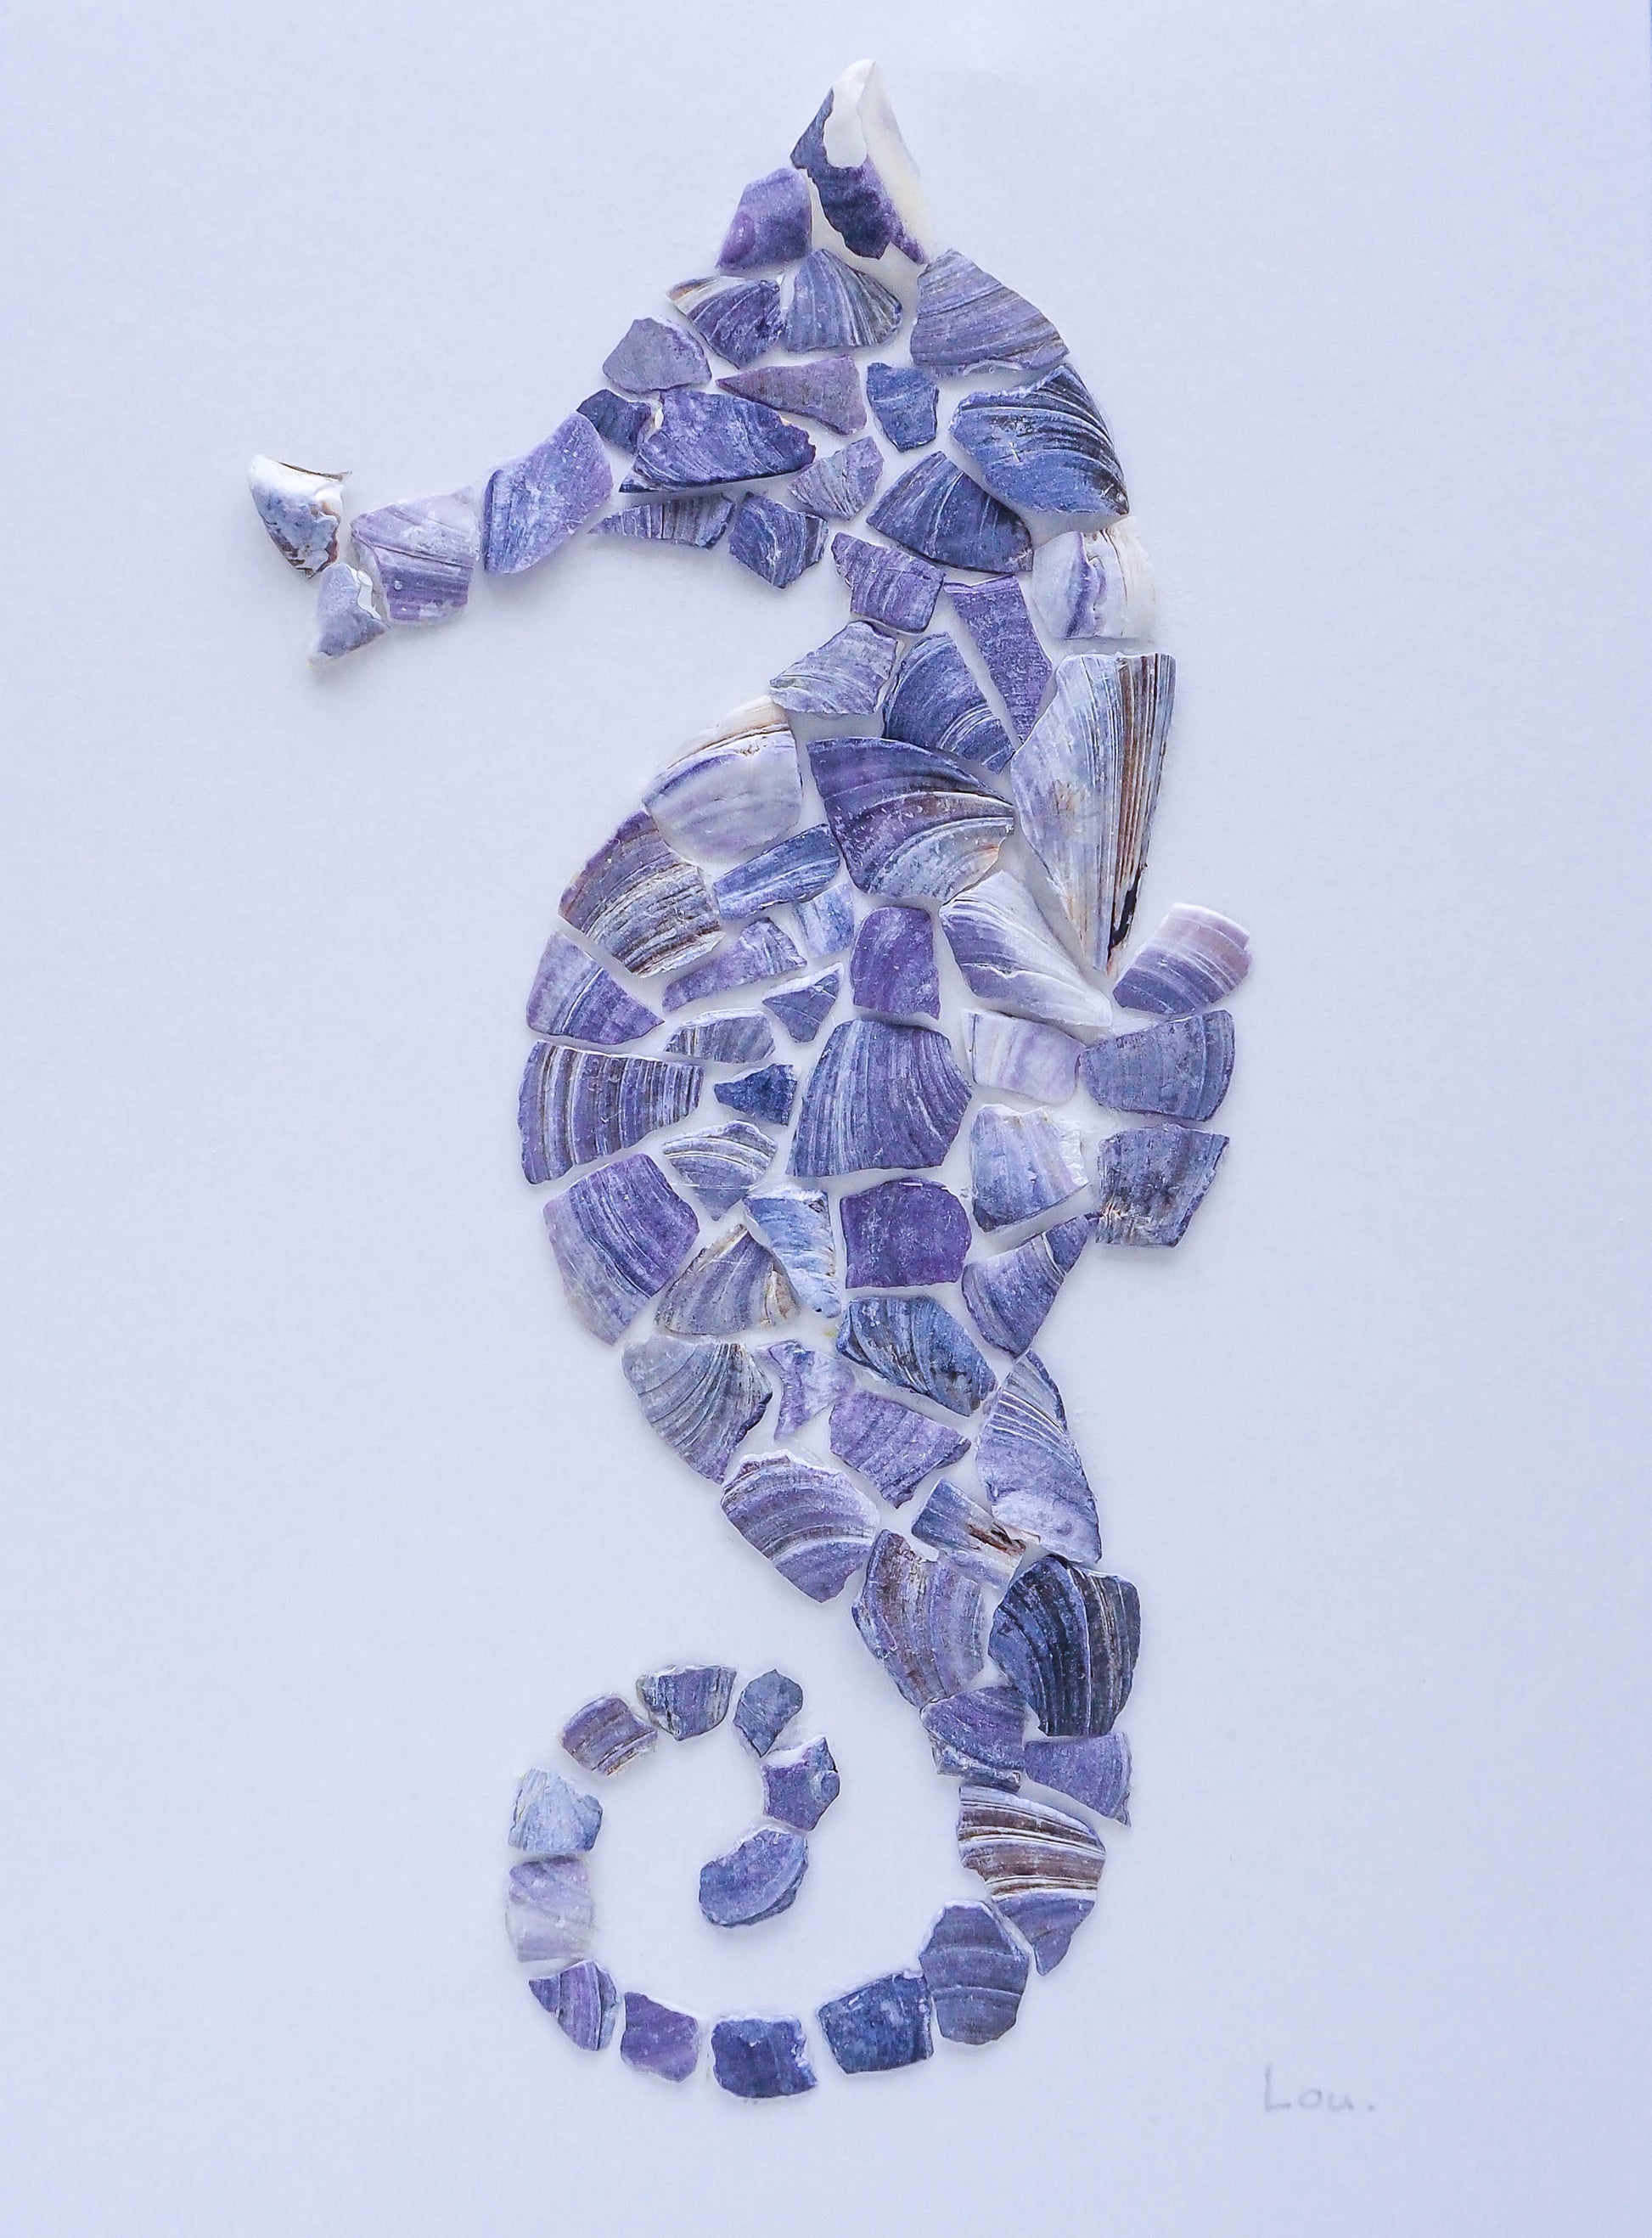 Total detail view of seahorse artwork made of mussel shells from portugak